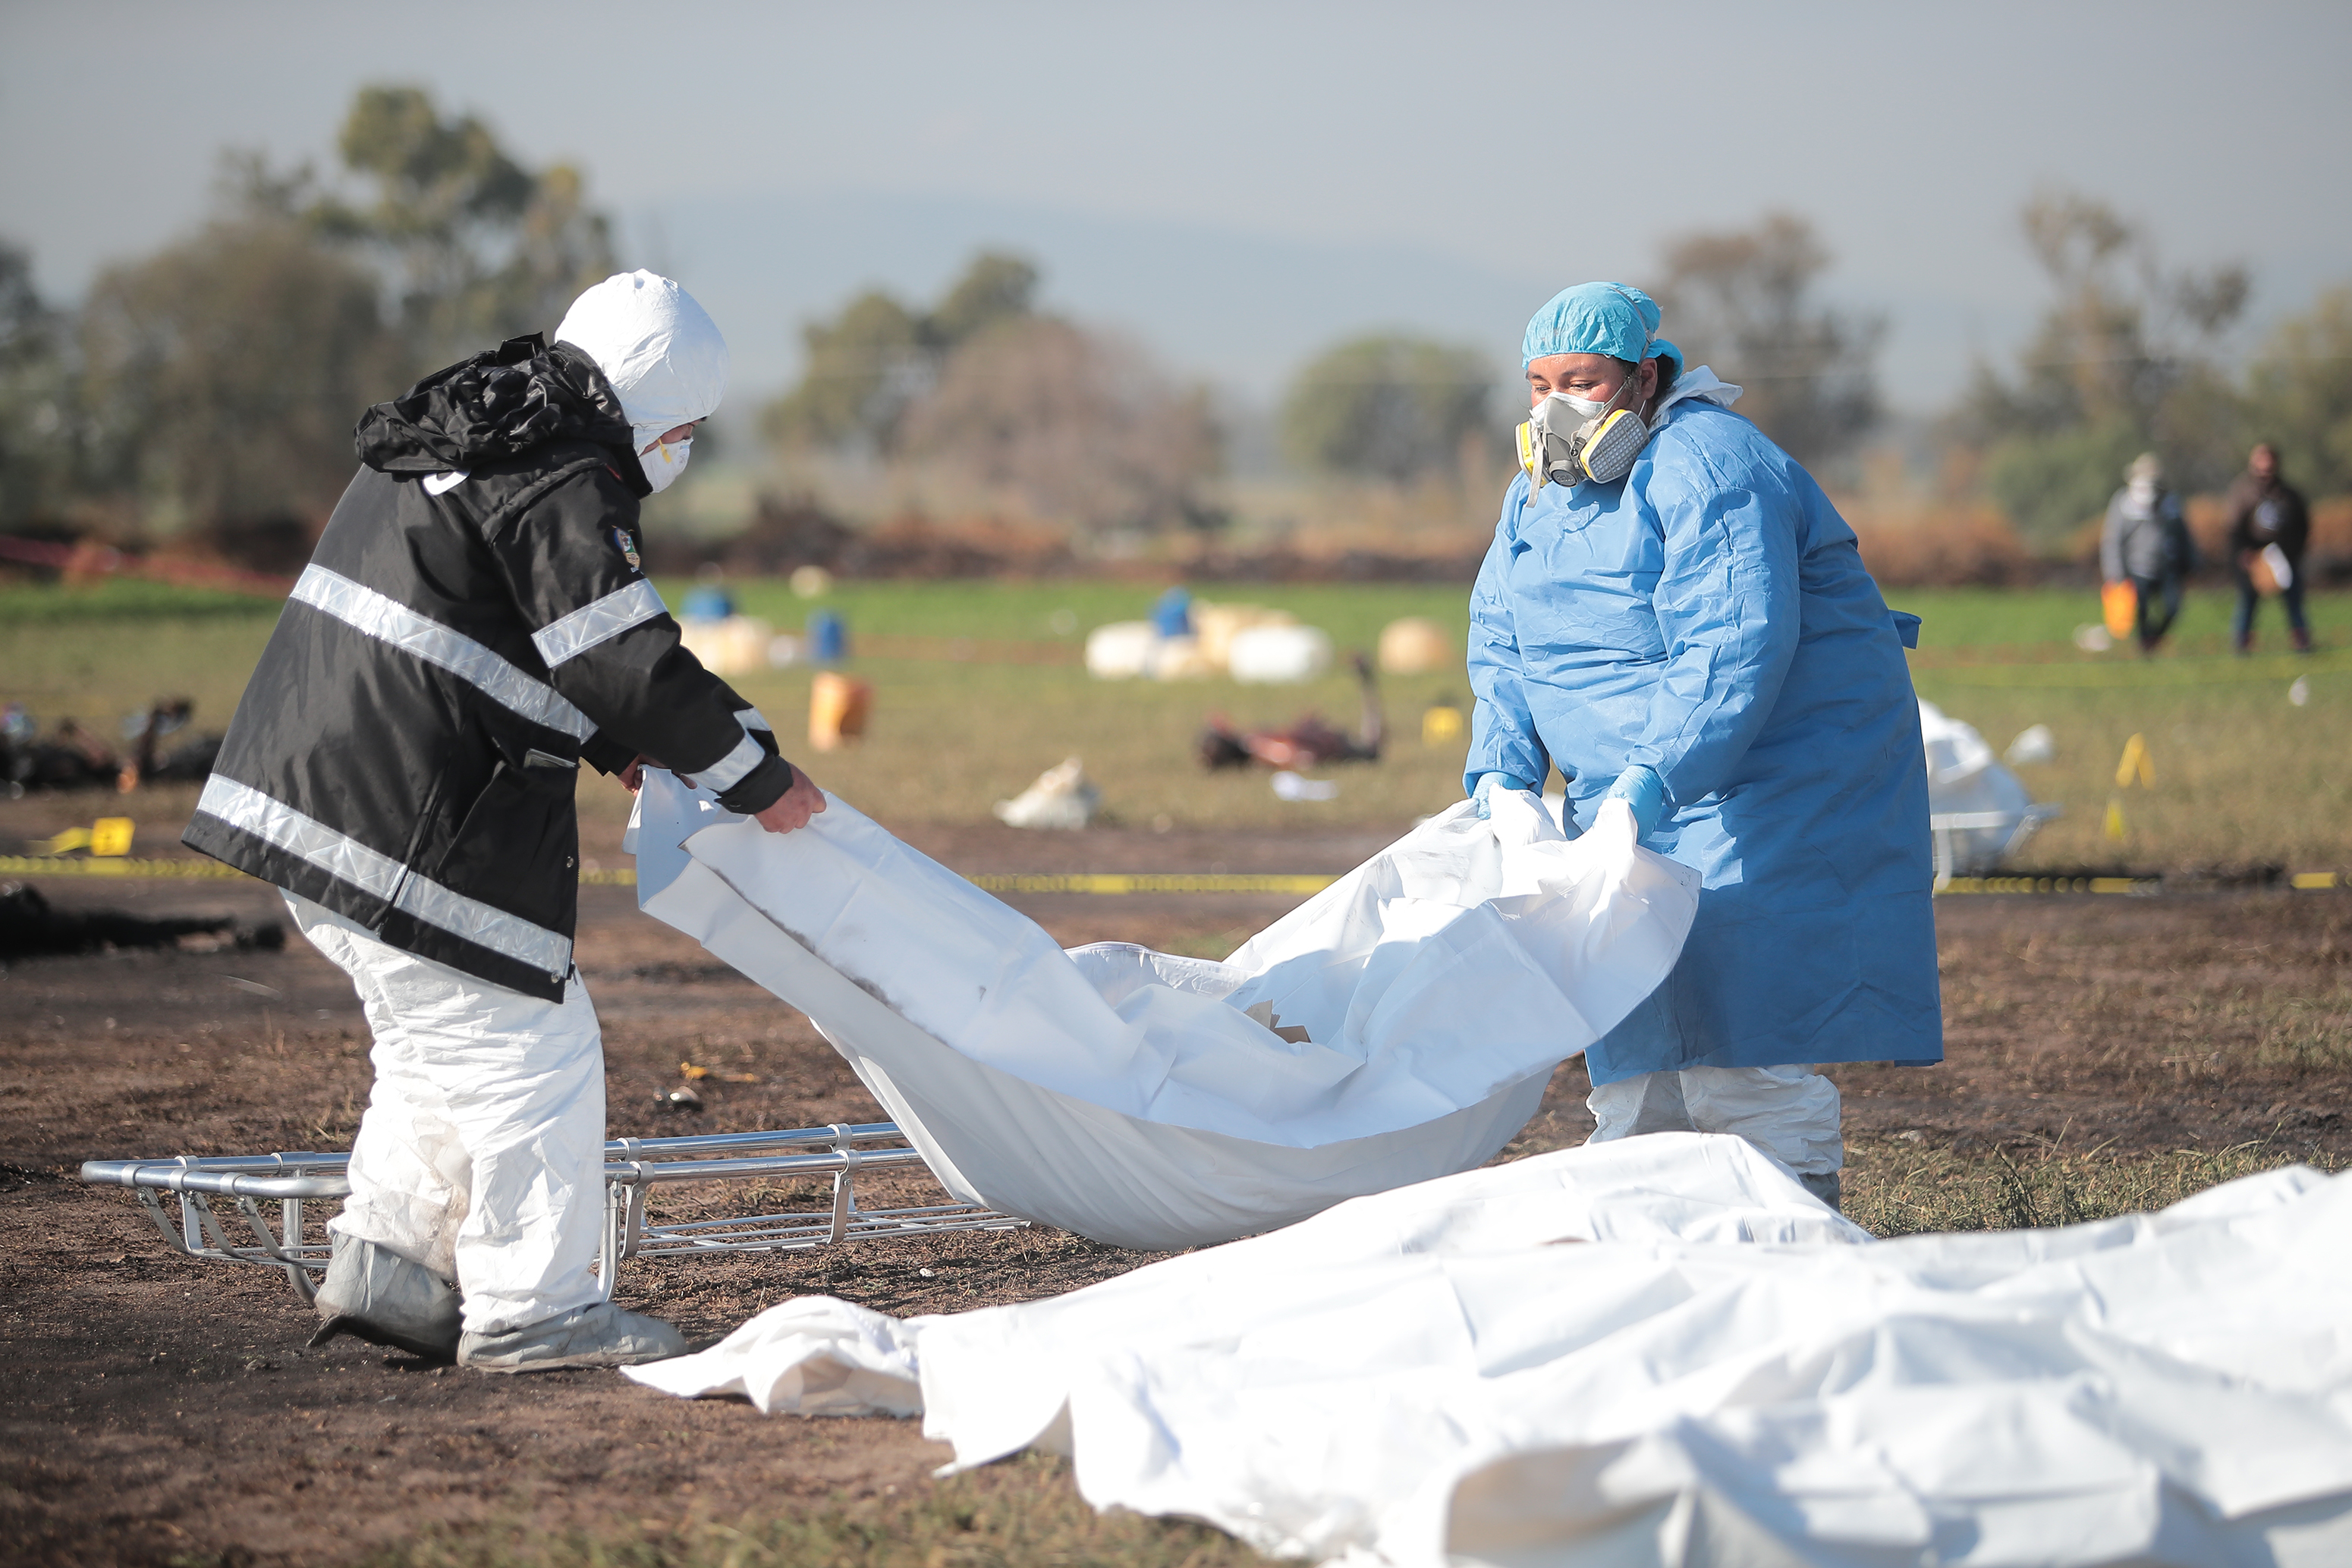 TLAHUELILPAN, MEXICO - JANUARY 19: (EDITOR'S NOTE: Image depicts graphic content) Forensic doctors work with burned bodies after an explosion in a pipeline belonging to Mexican oil company PEMEX on January 19, 2019 in Tlahuelilpan, Mexico. In a statement, PEMEX announced that the explosion was caused by the illegal manipulation of the pipeline, as minutes before the accident videos were shot where people could be seen filling drums and car fuel tanks. (Photo by Hector Vivas/Getty Images)